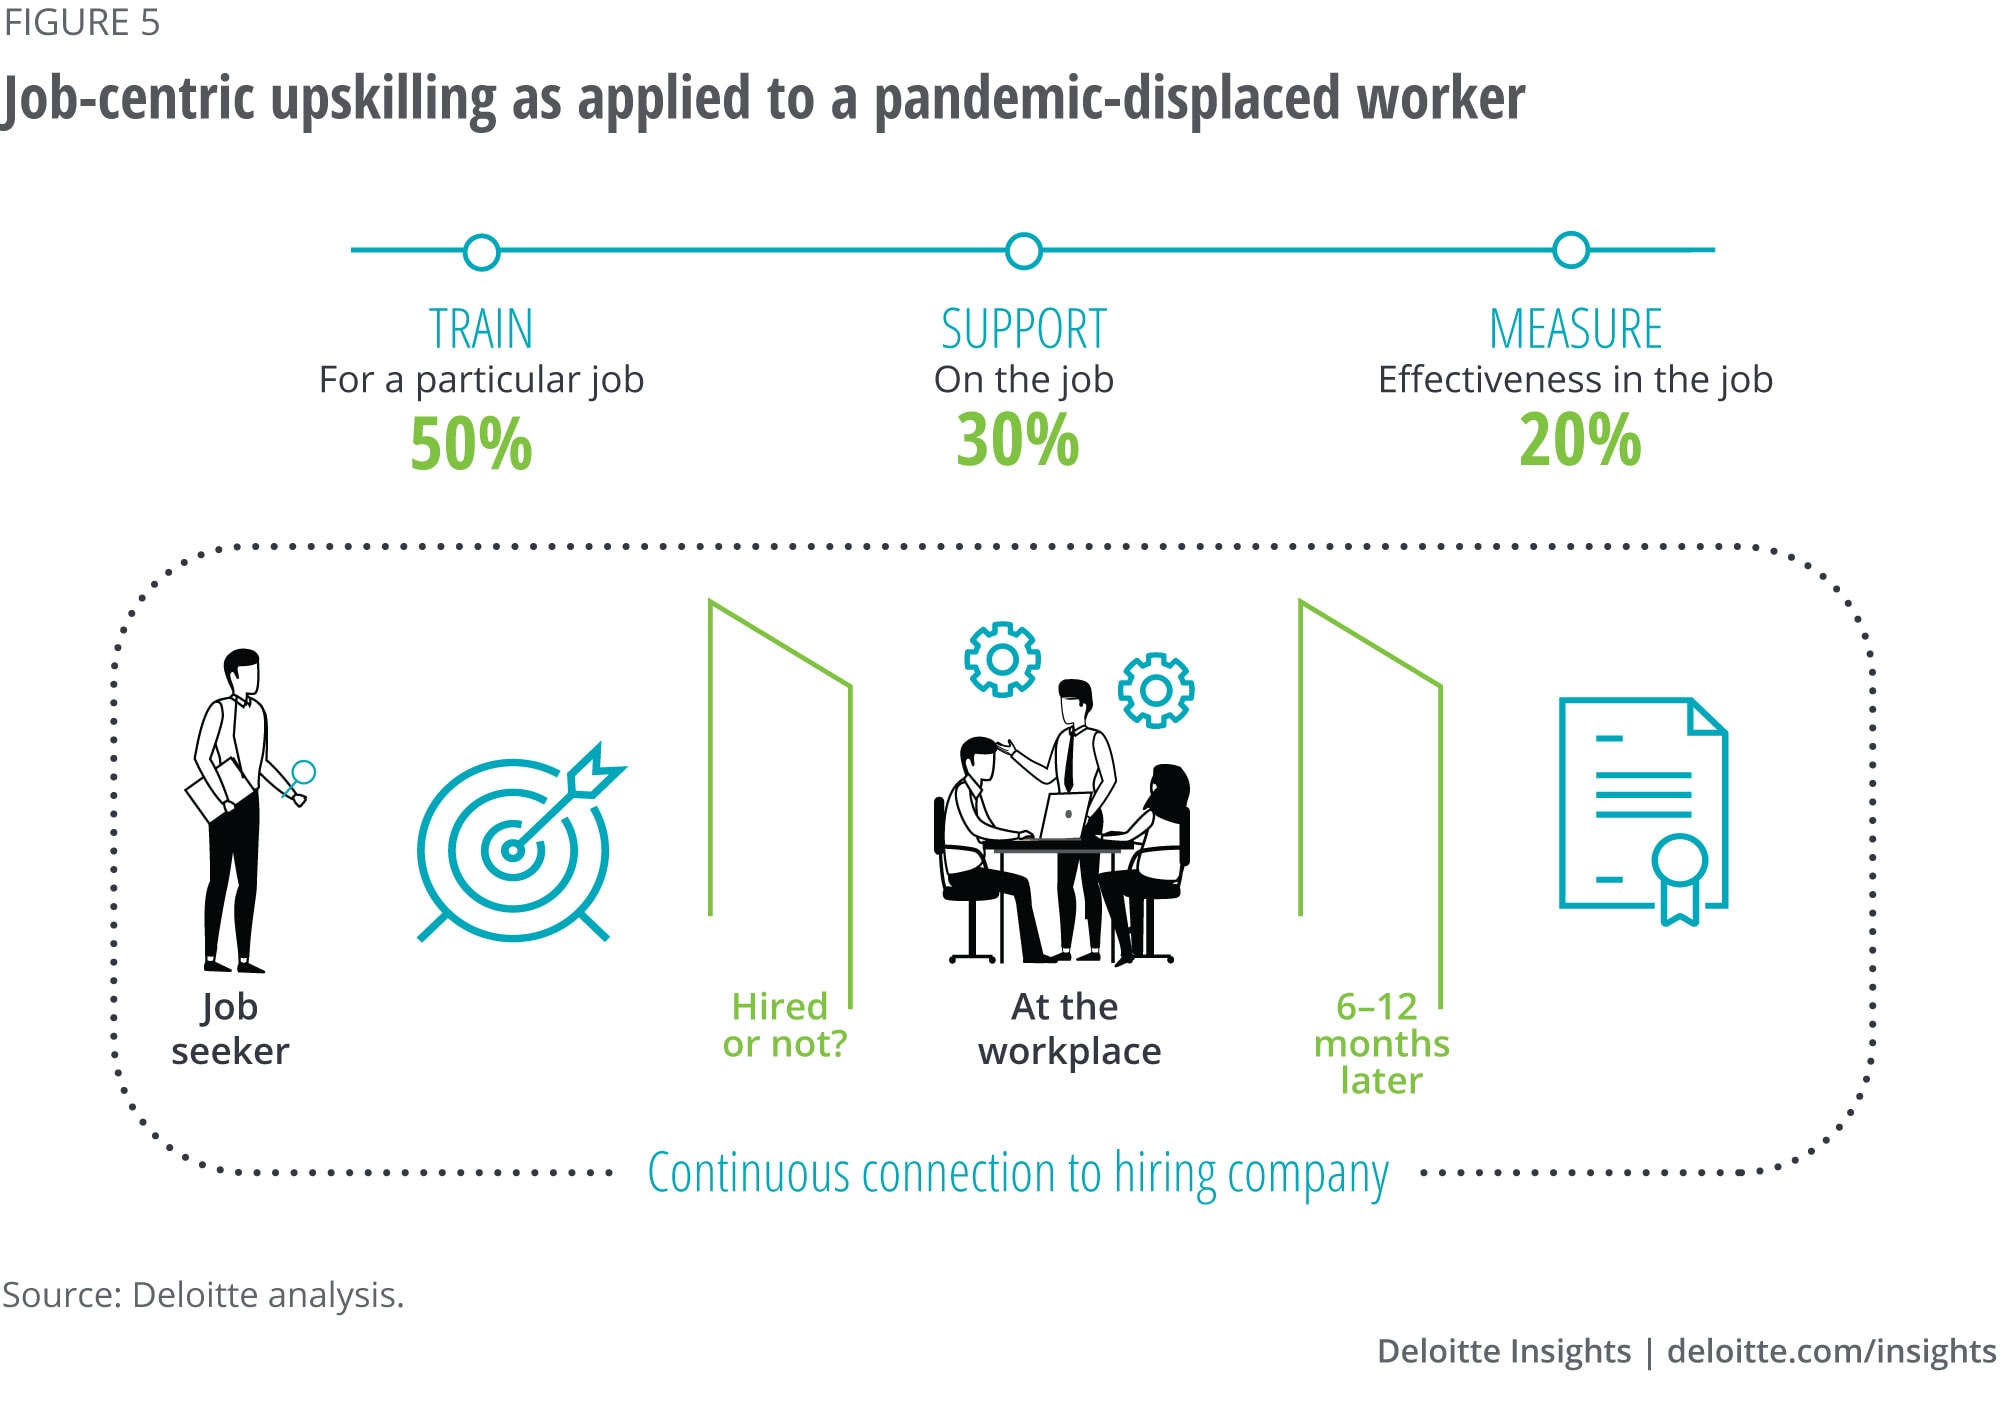 Job-centric upskilling as applied to a pandemic-displaced worker